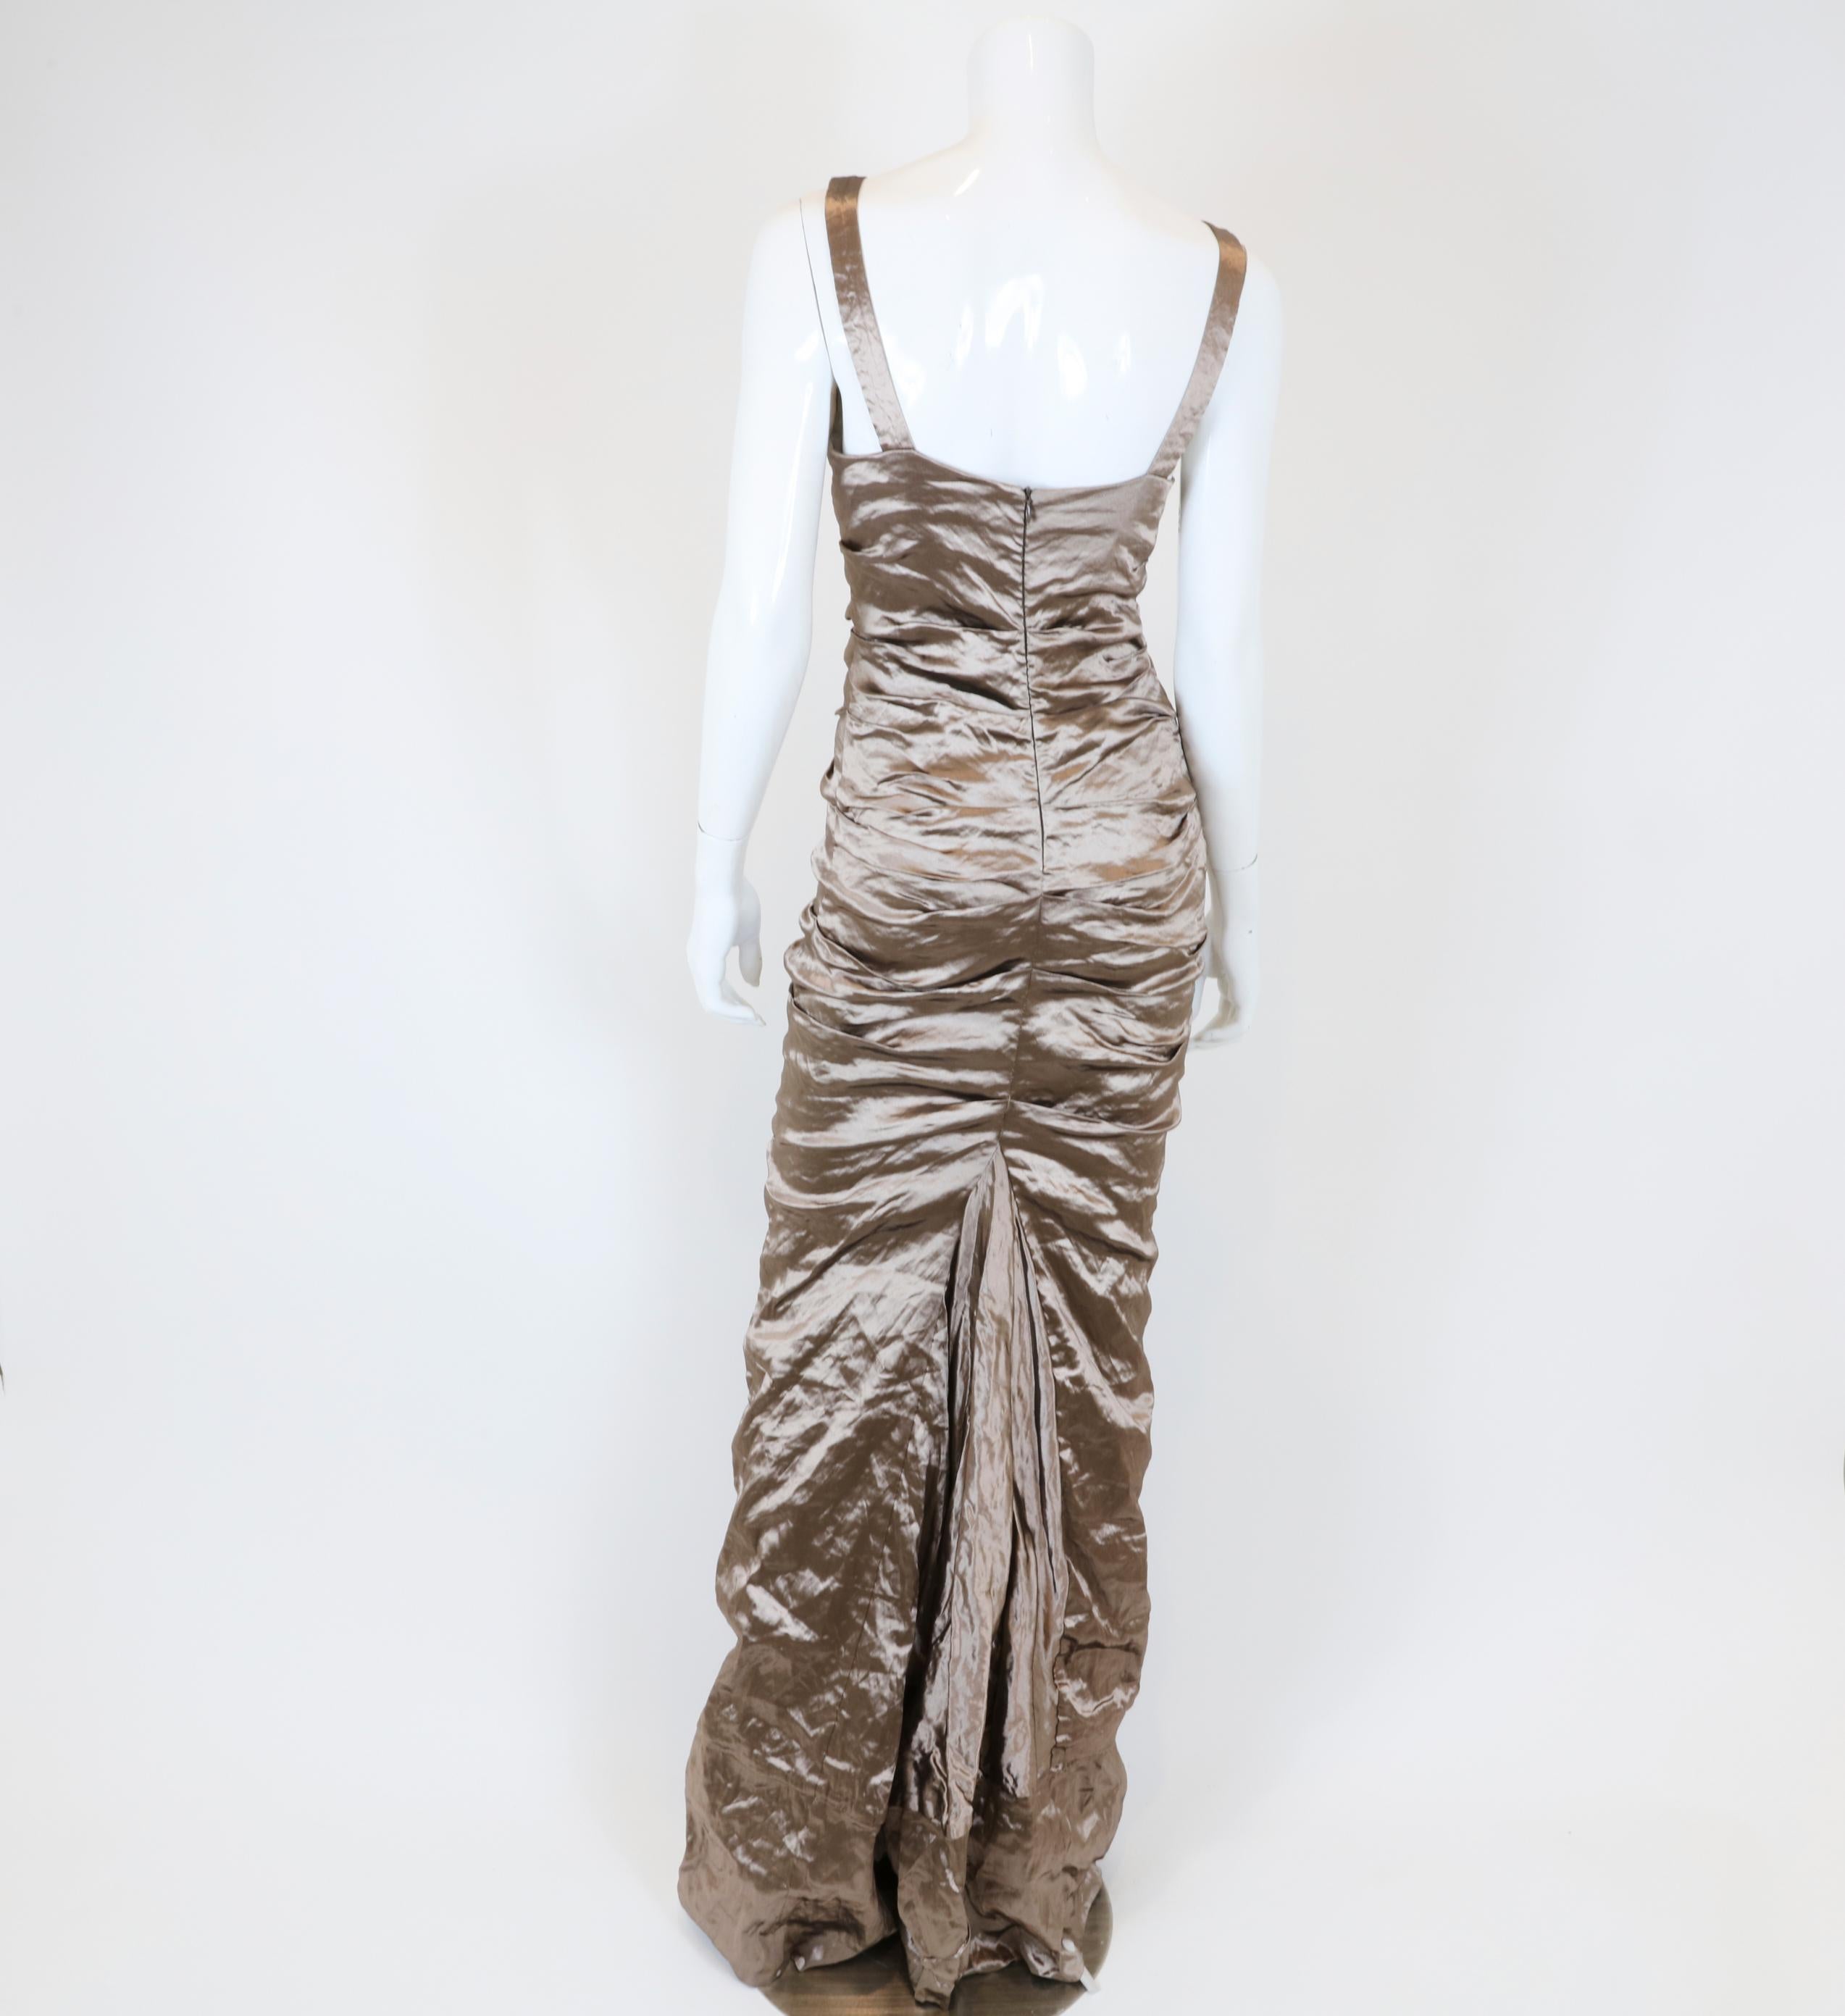 New with tags!
Sleeveless gown